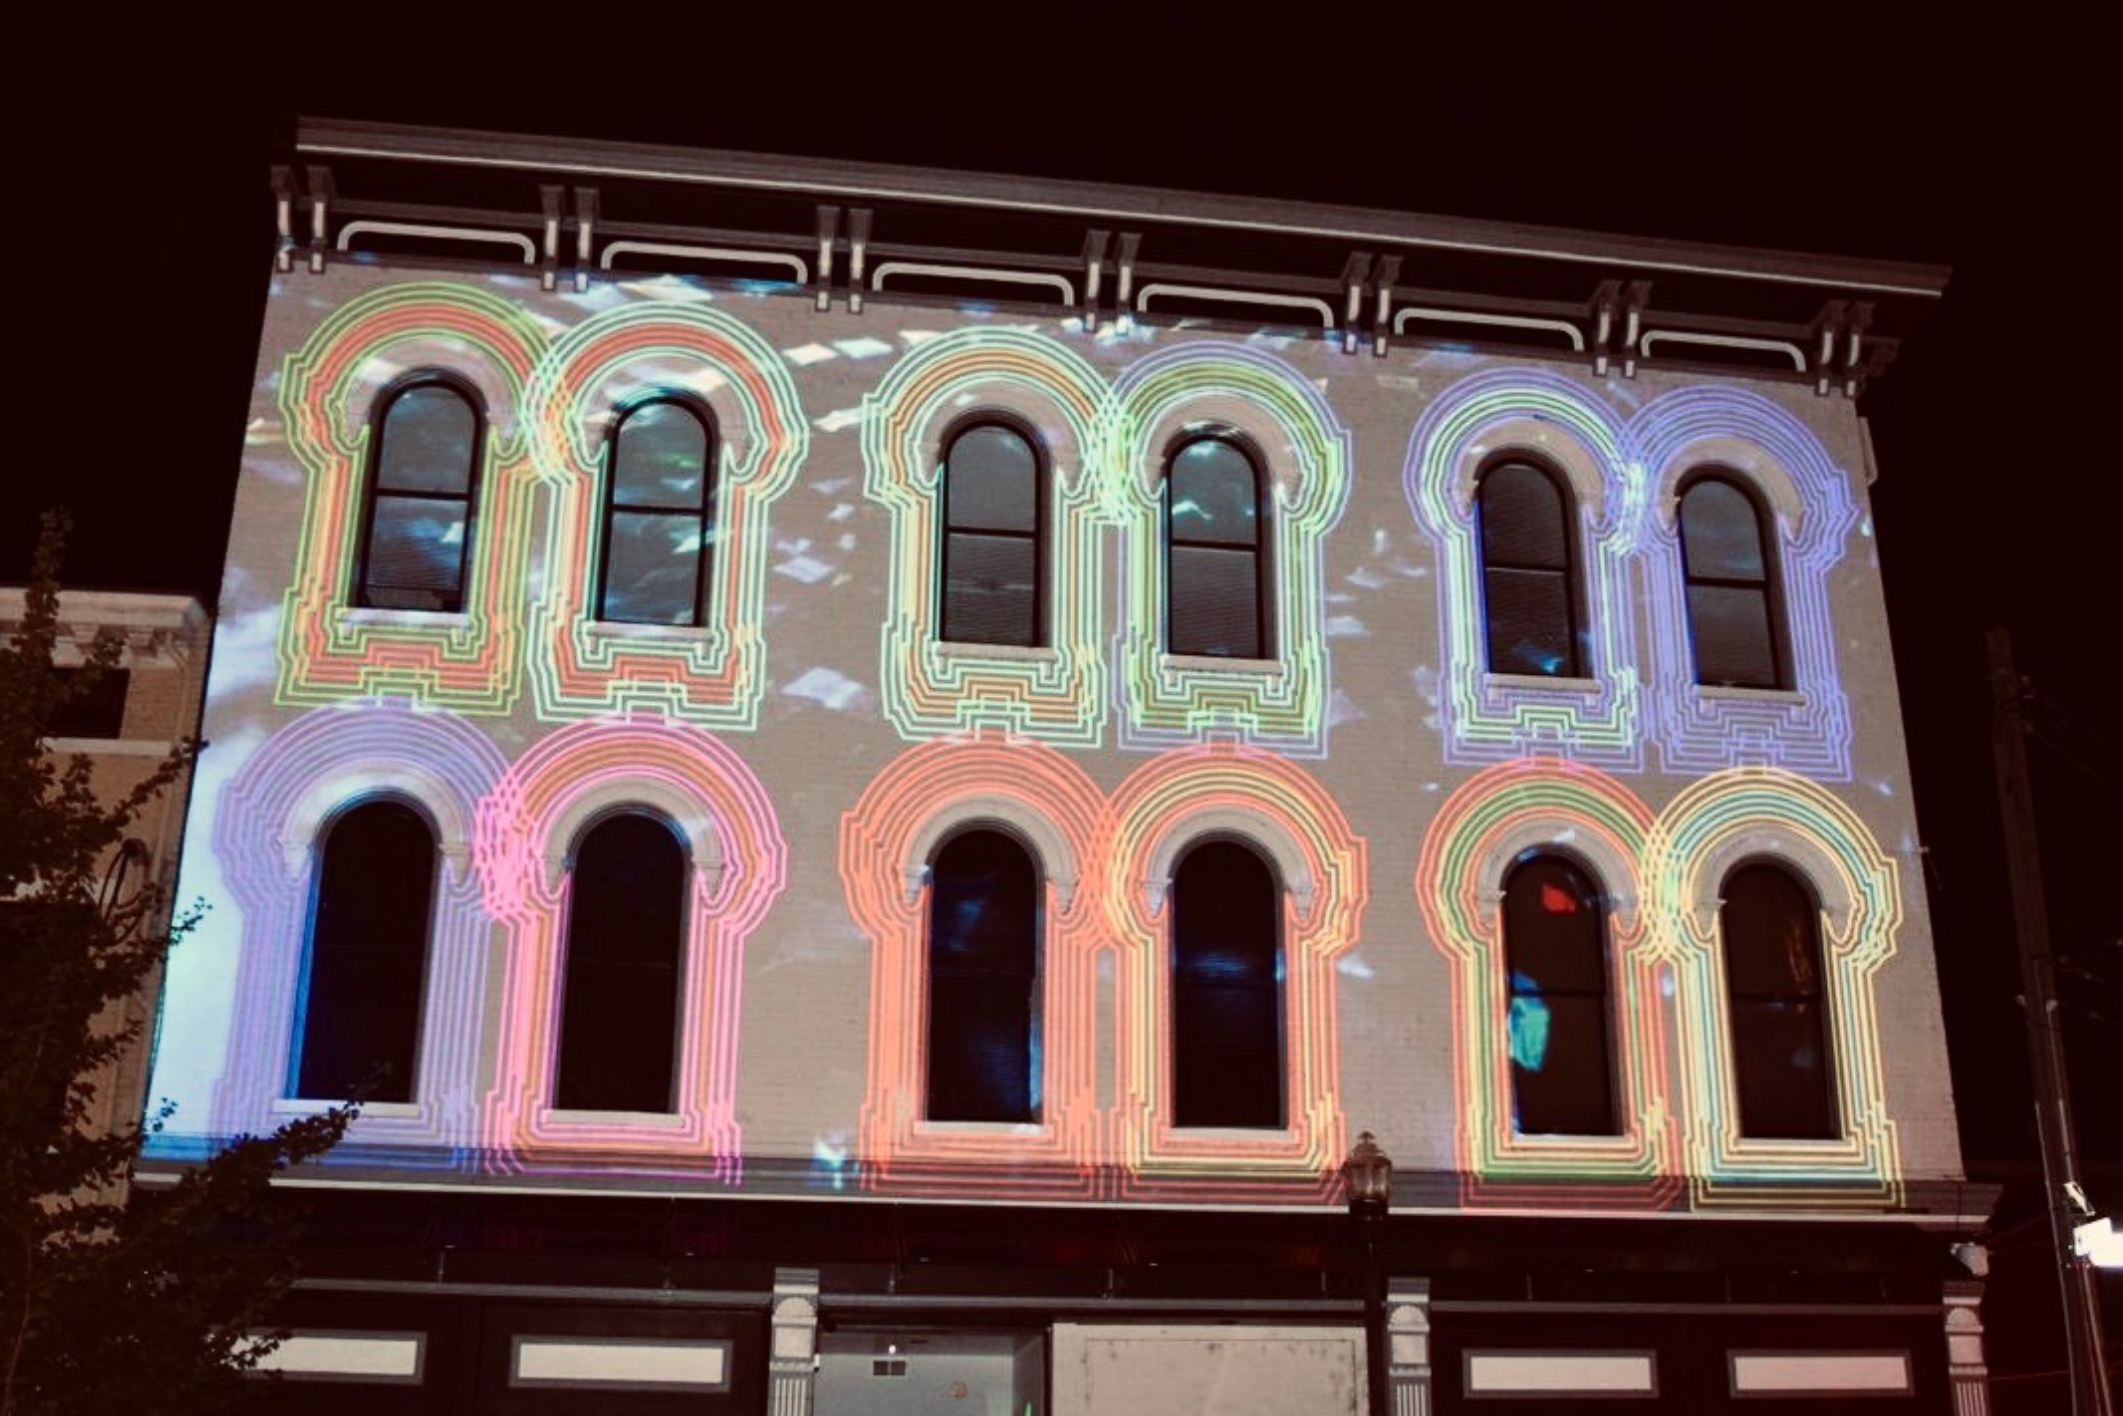 Building with light projections.